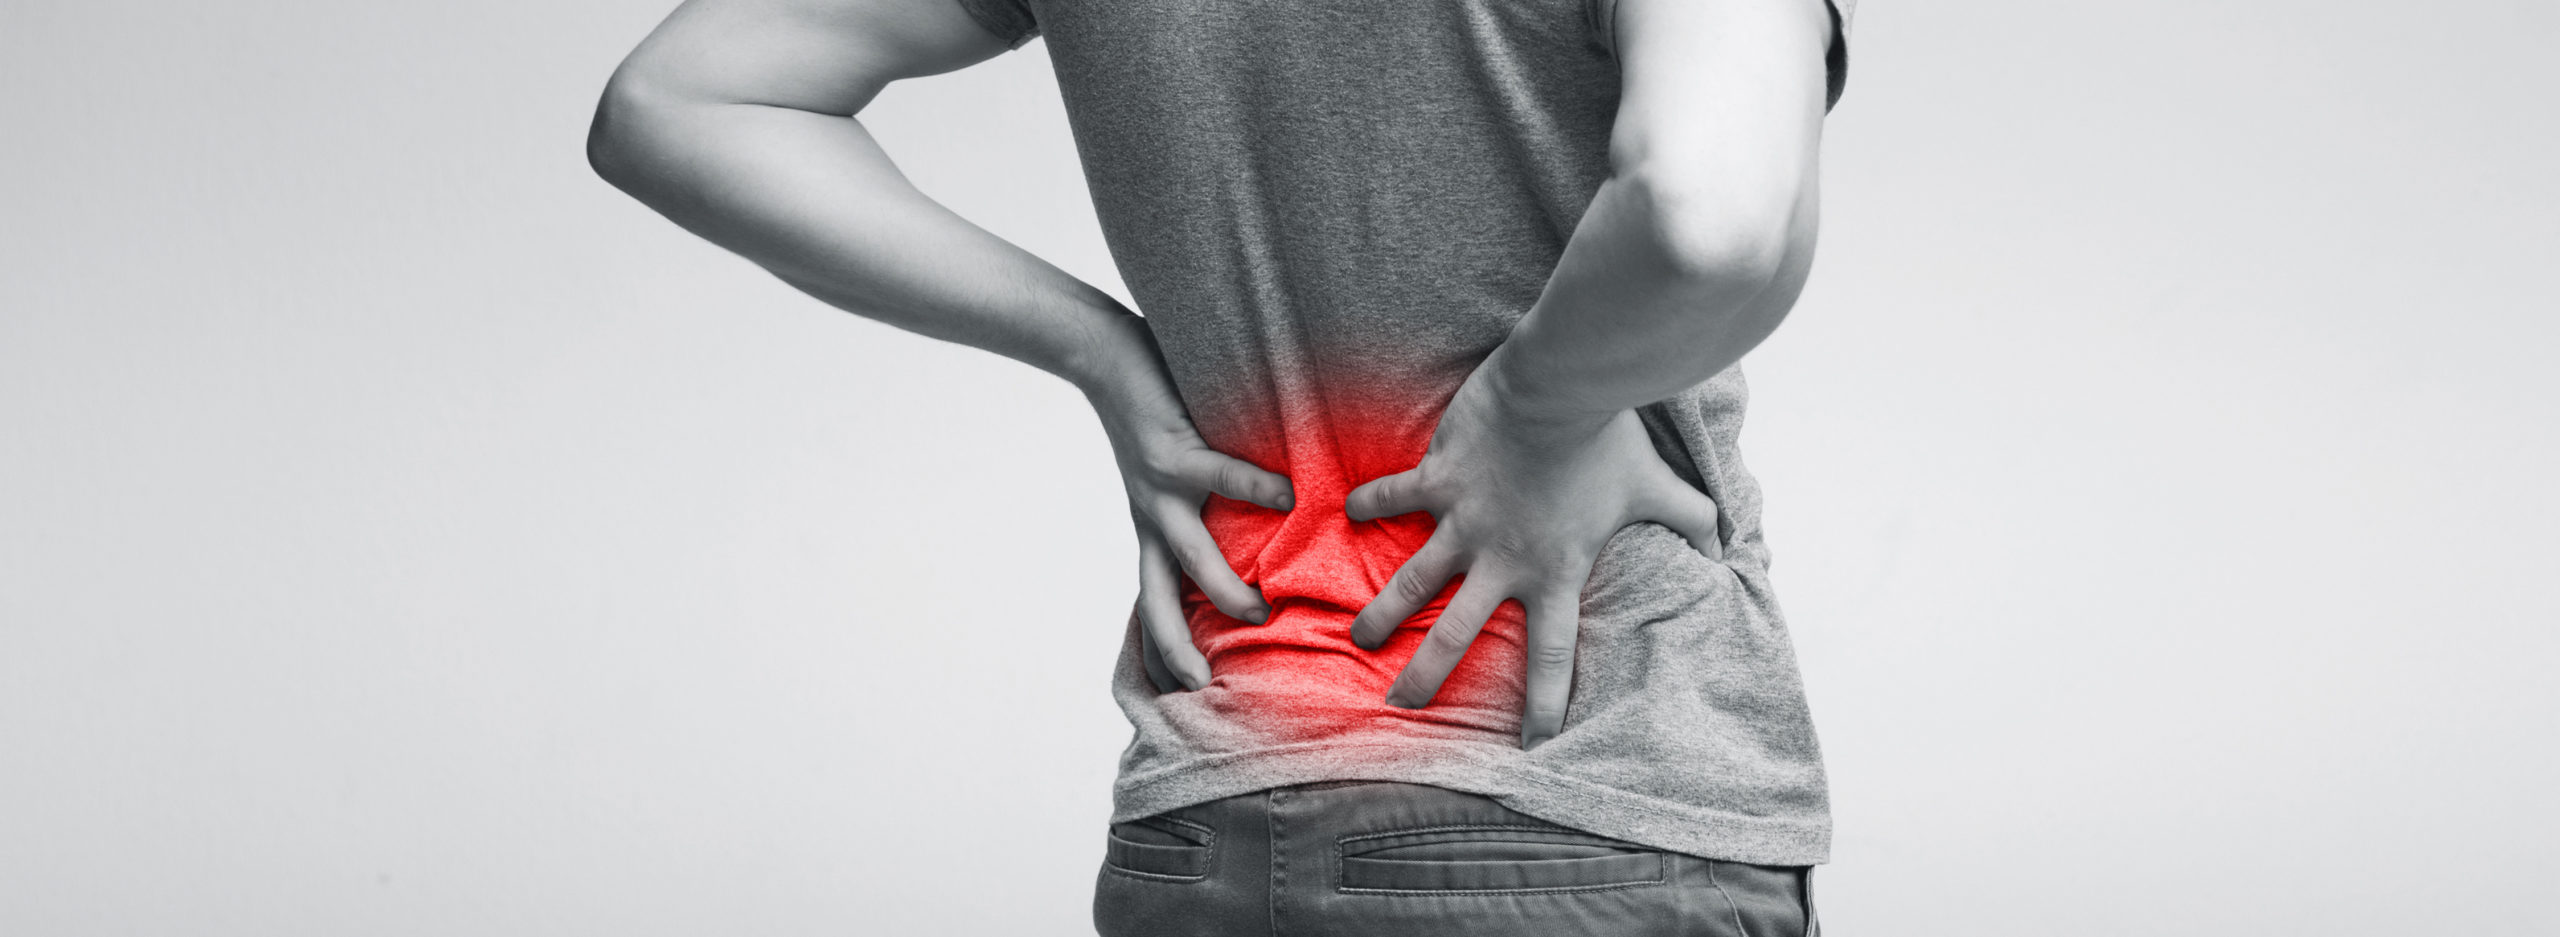 TIPS TO PREVENT BACK INJURIES ON THE JOB